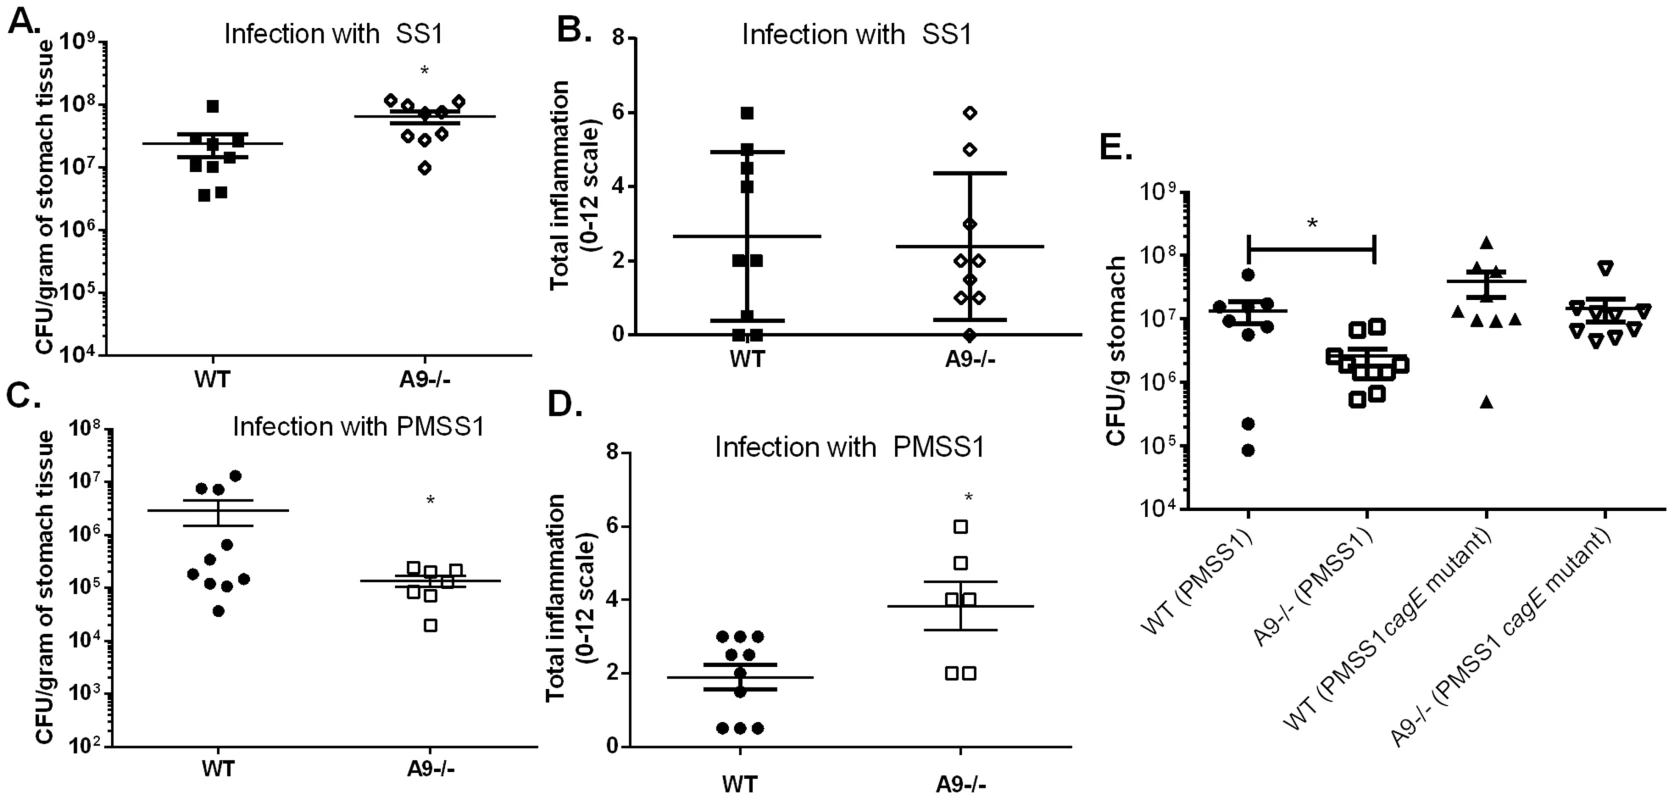 The presence of calprotectin increases bacterial burden and reduces inflammation in WT mice in a <i>cag</i> T4SS-dependent manner.